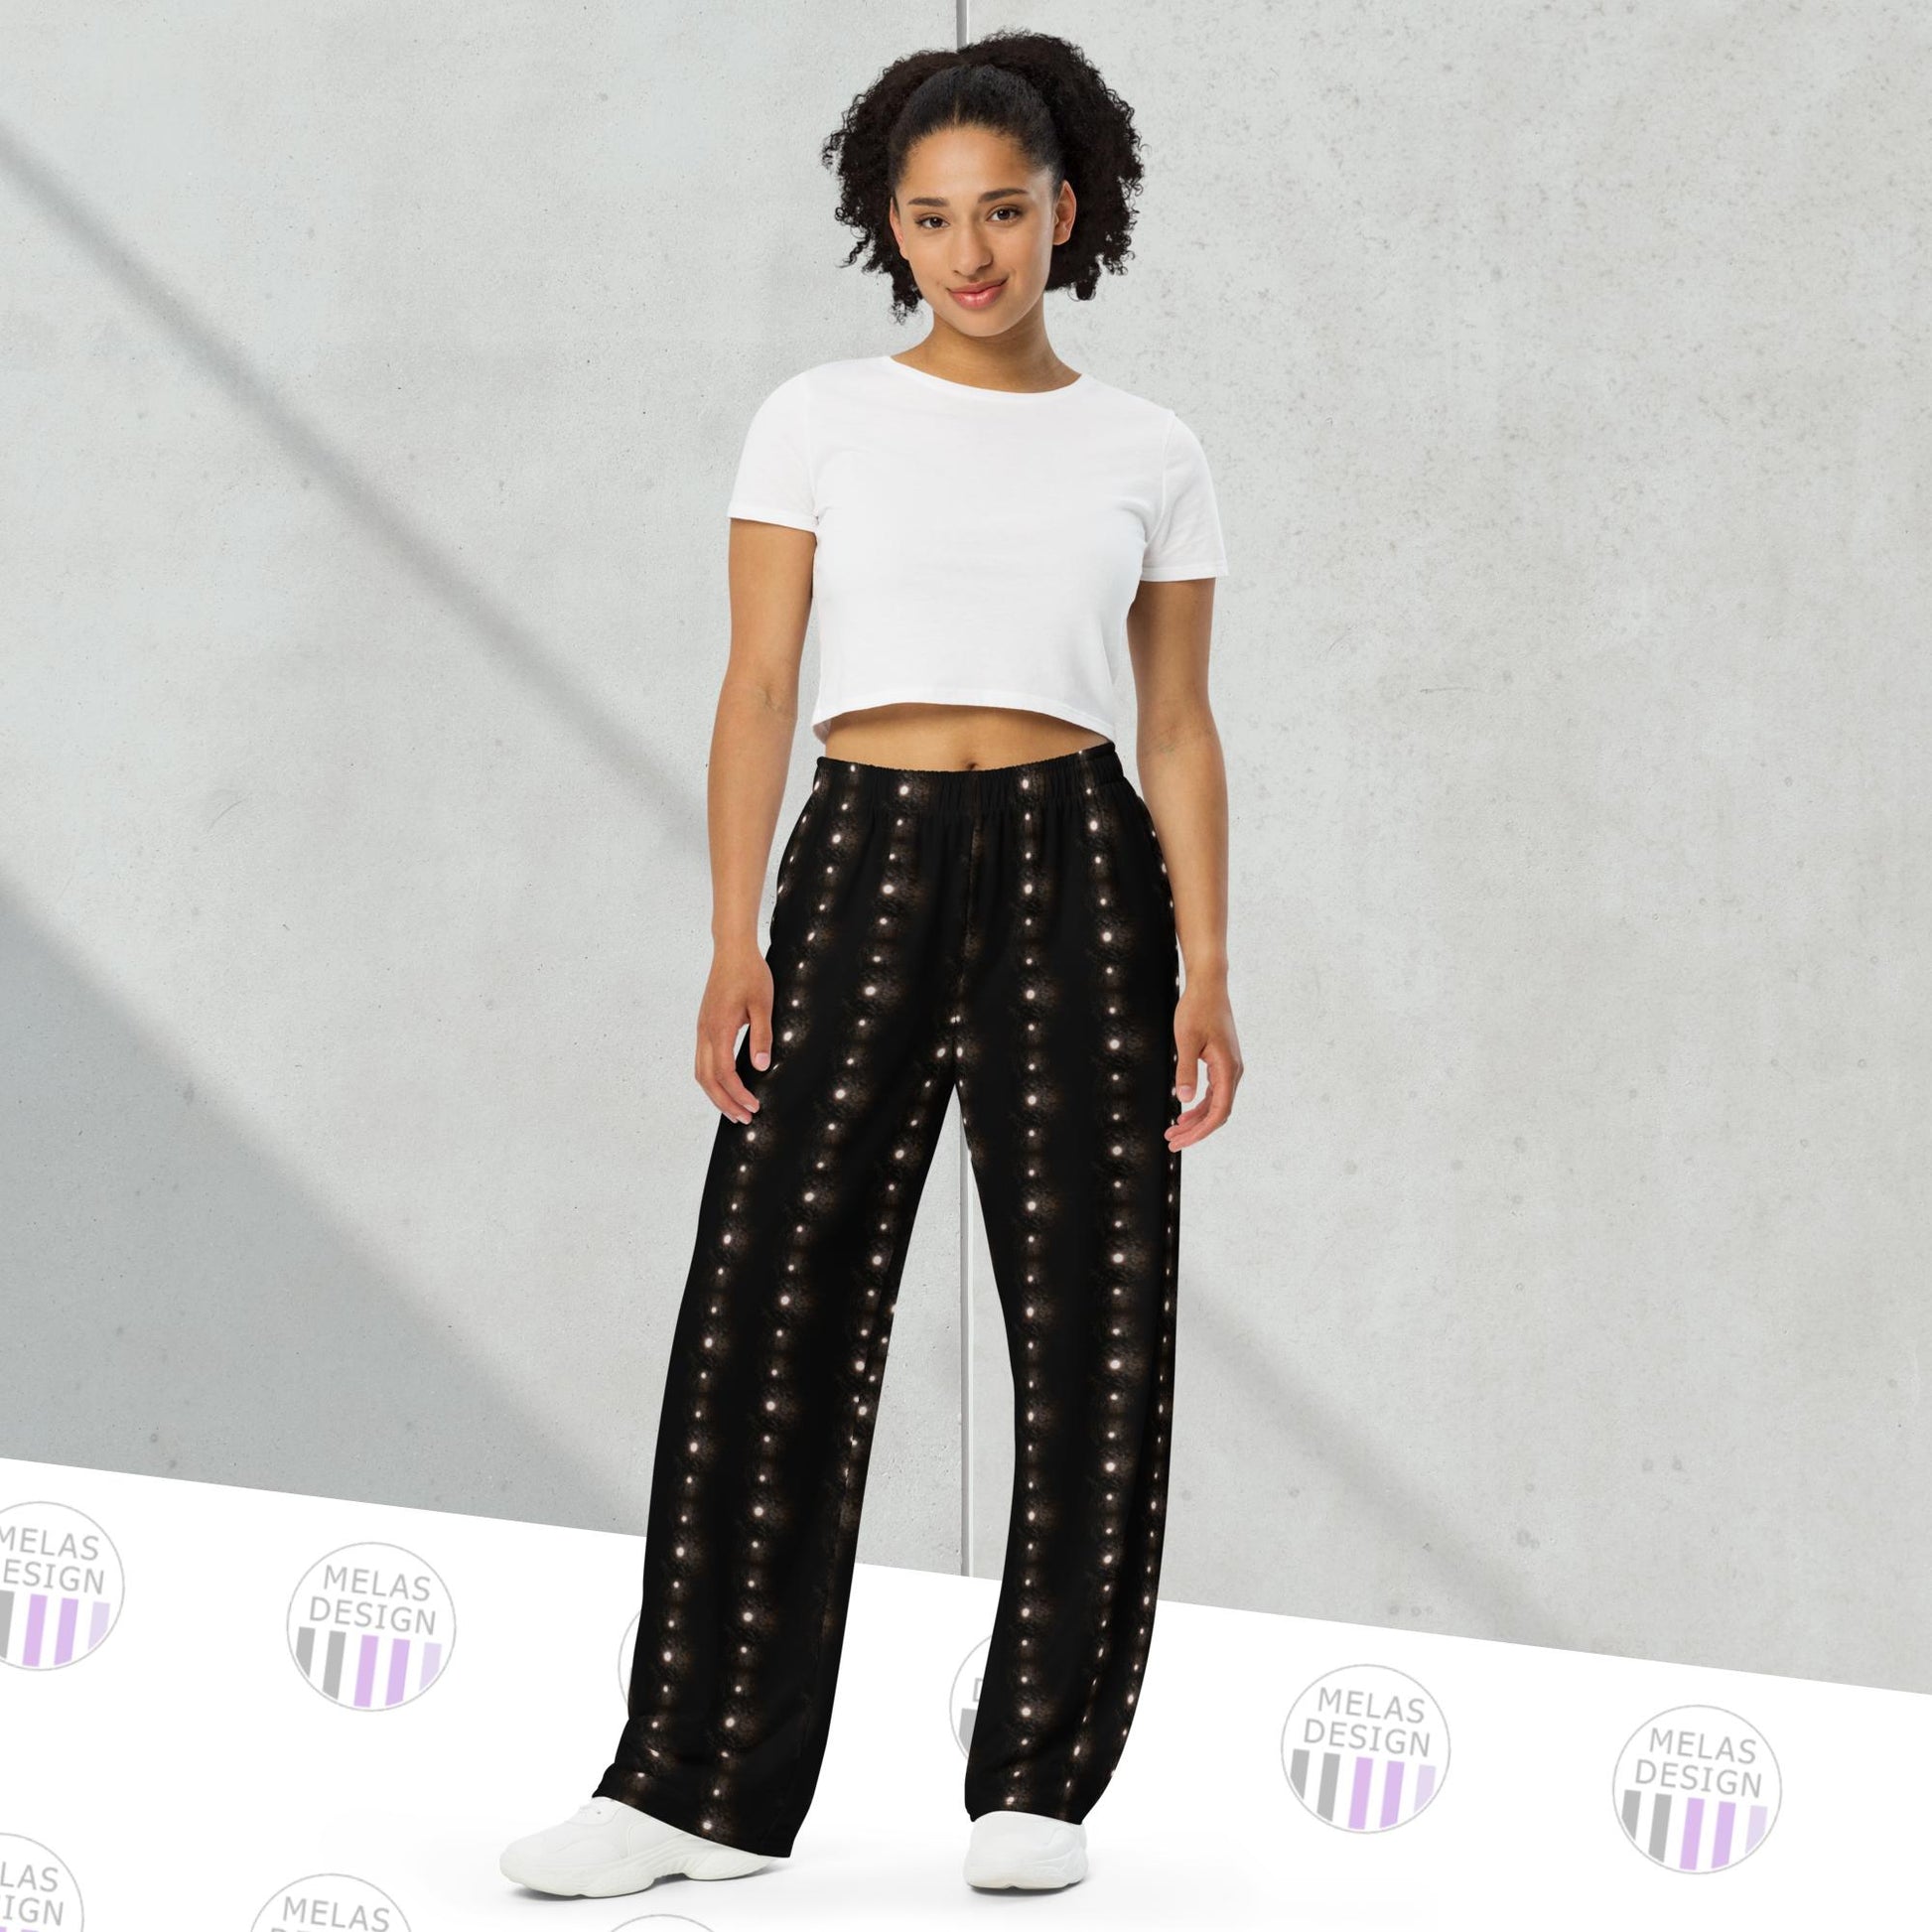 Full Moon in Dotted Stripes All-over Print Wide-Leg Pants; comfortable; witchy; witch aesthetic; pagan; full moon; black and white; Melasdesign; pants; dotted; dots; witch aesthetic; small business